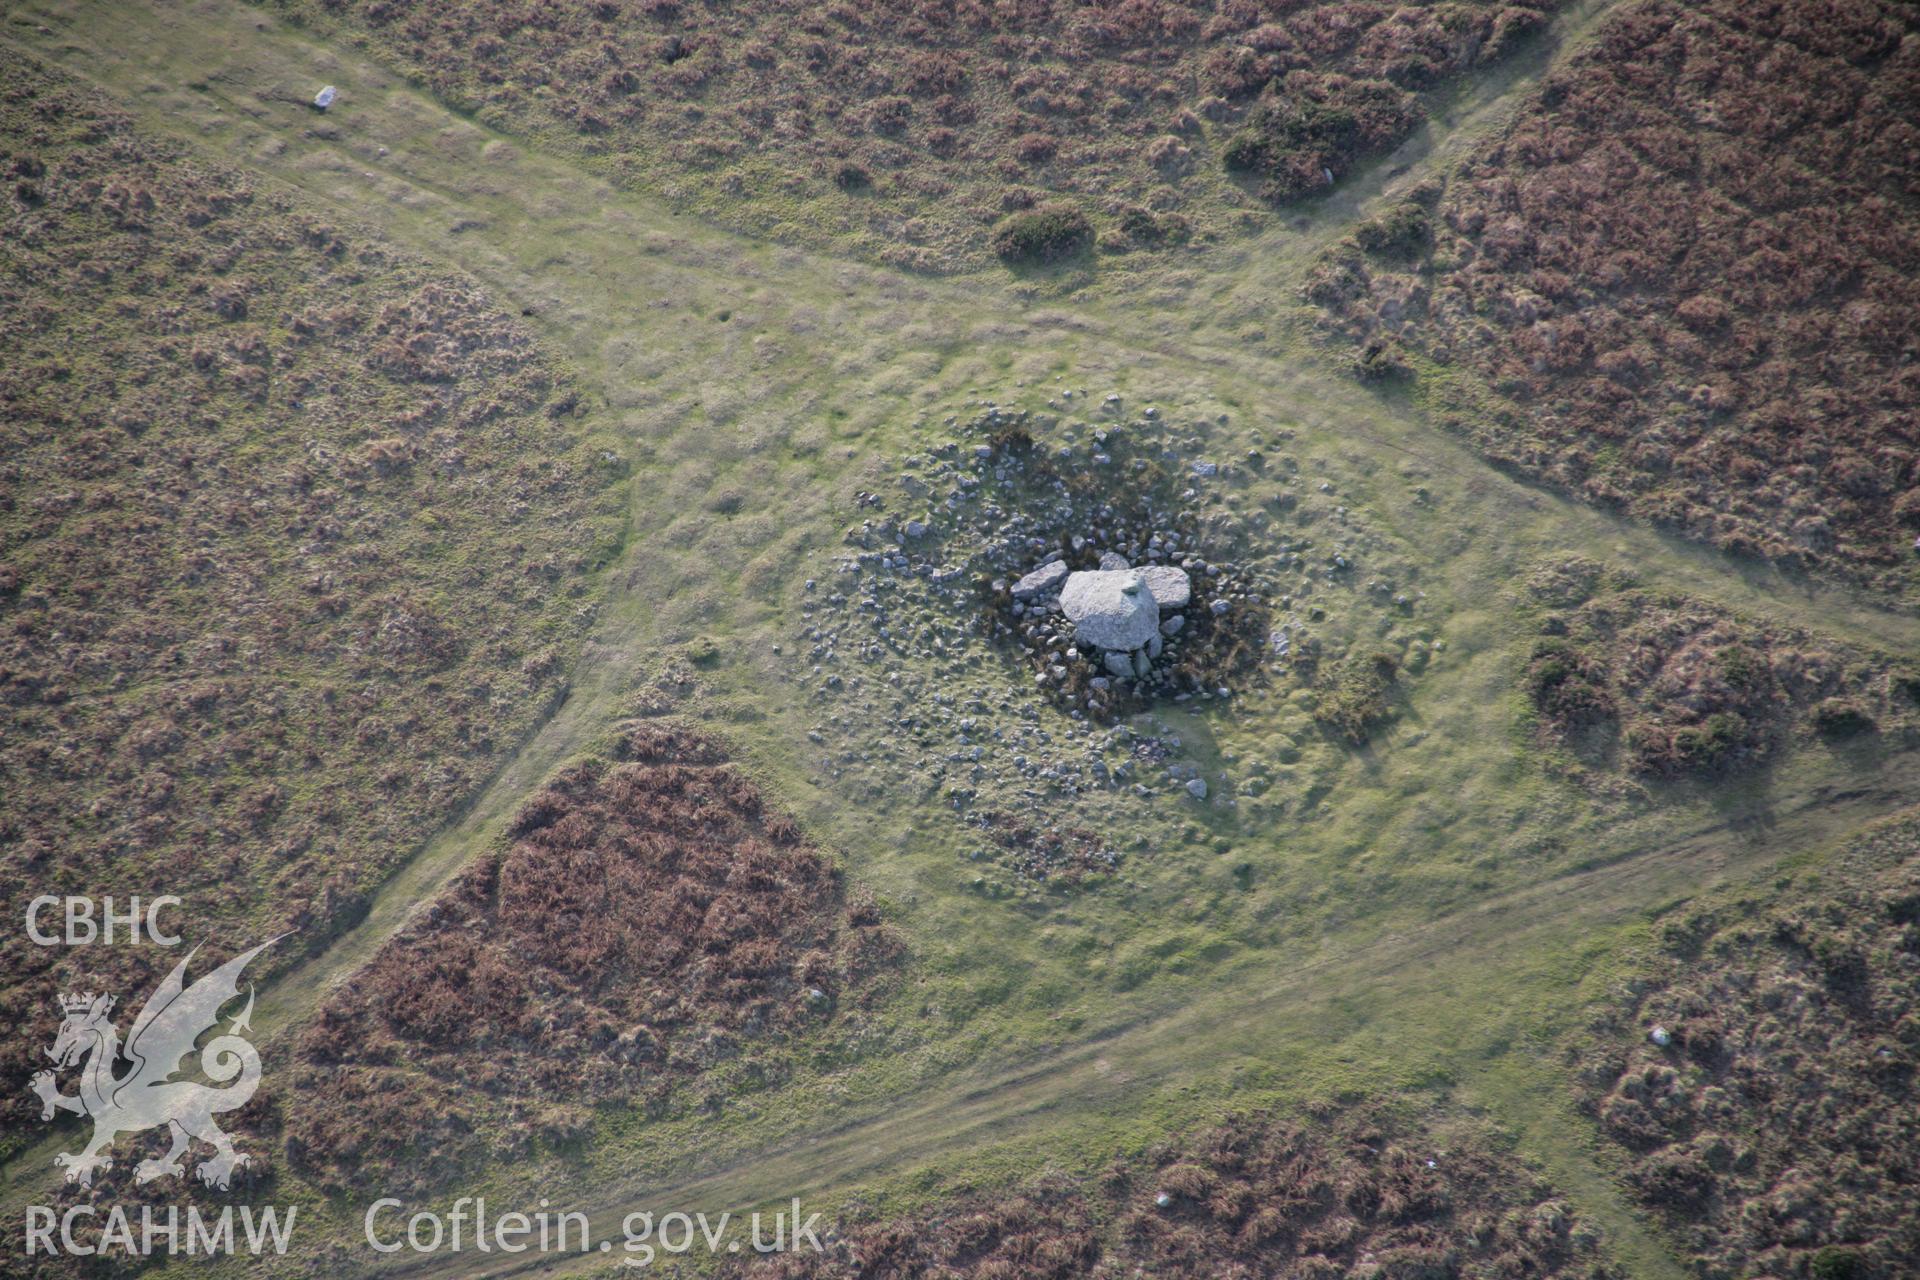 RCAHMW colour oblique aerial photograph of Arthur's Stone (Maen Ceti), Cefn Bryn from the north-east. Taken on 26 January 2006 by Toby Driver.